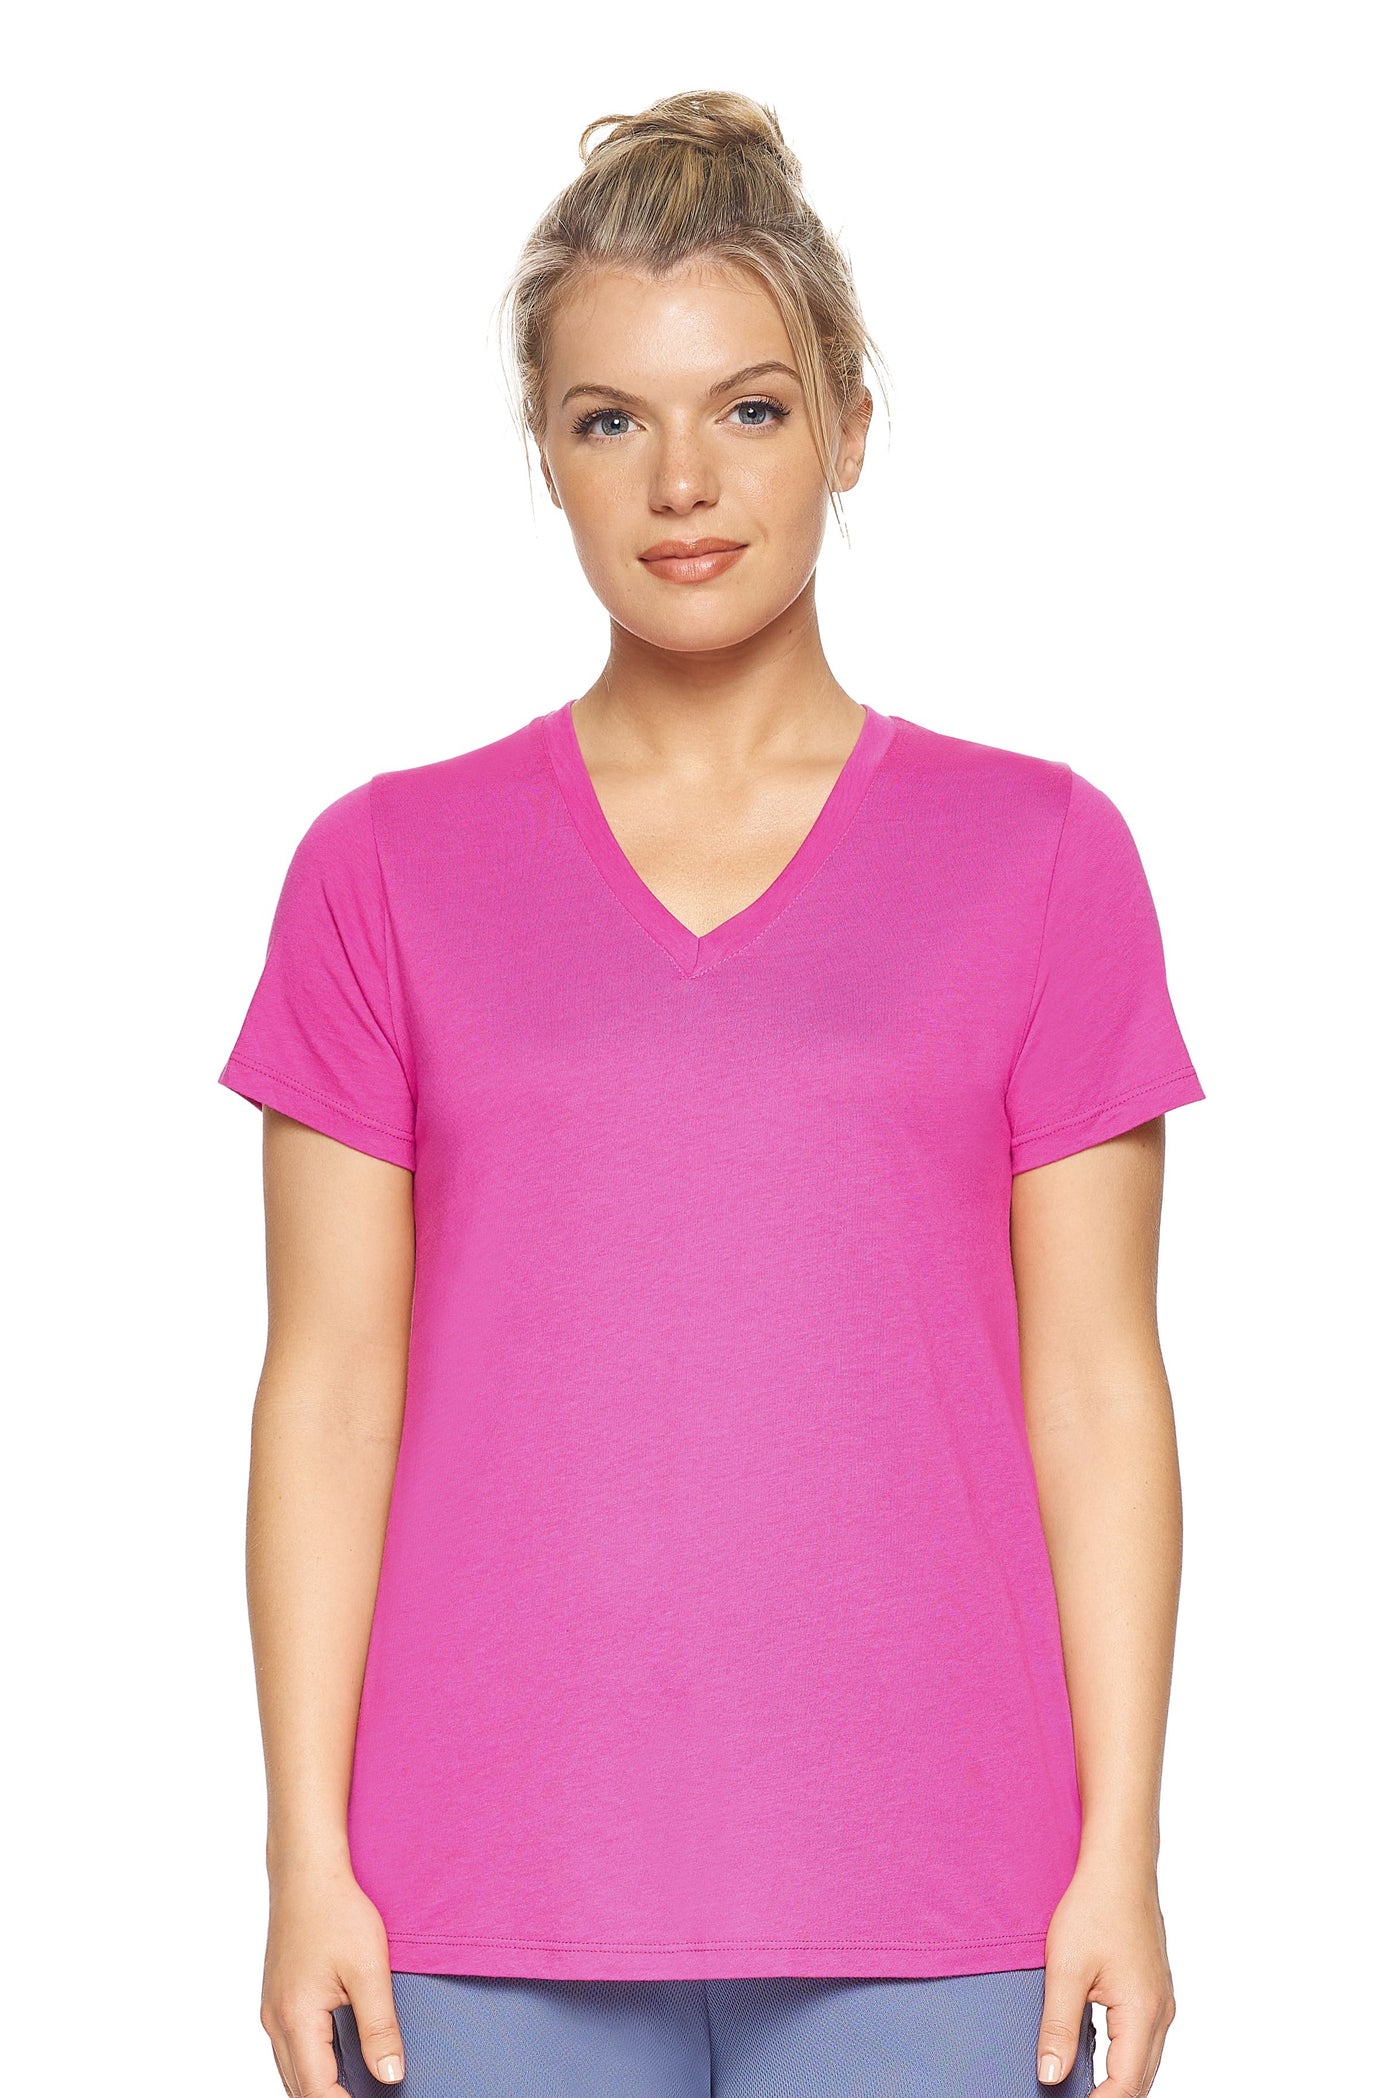 Expert Brand Retail Sustainable Eco-Friendly Micromodal Cotton Women's V-neck T-shirt Made in the USA berry#color_berry